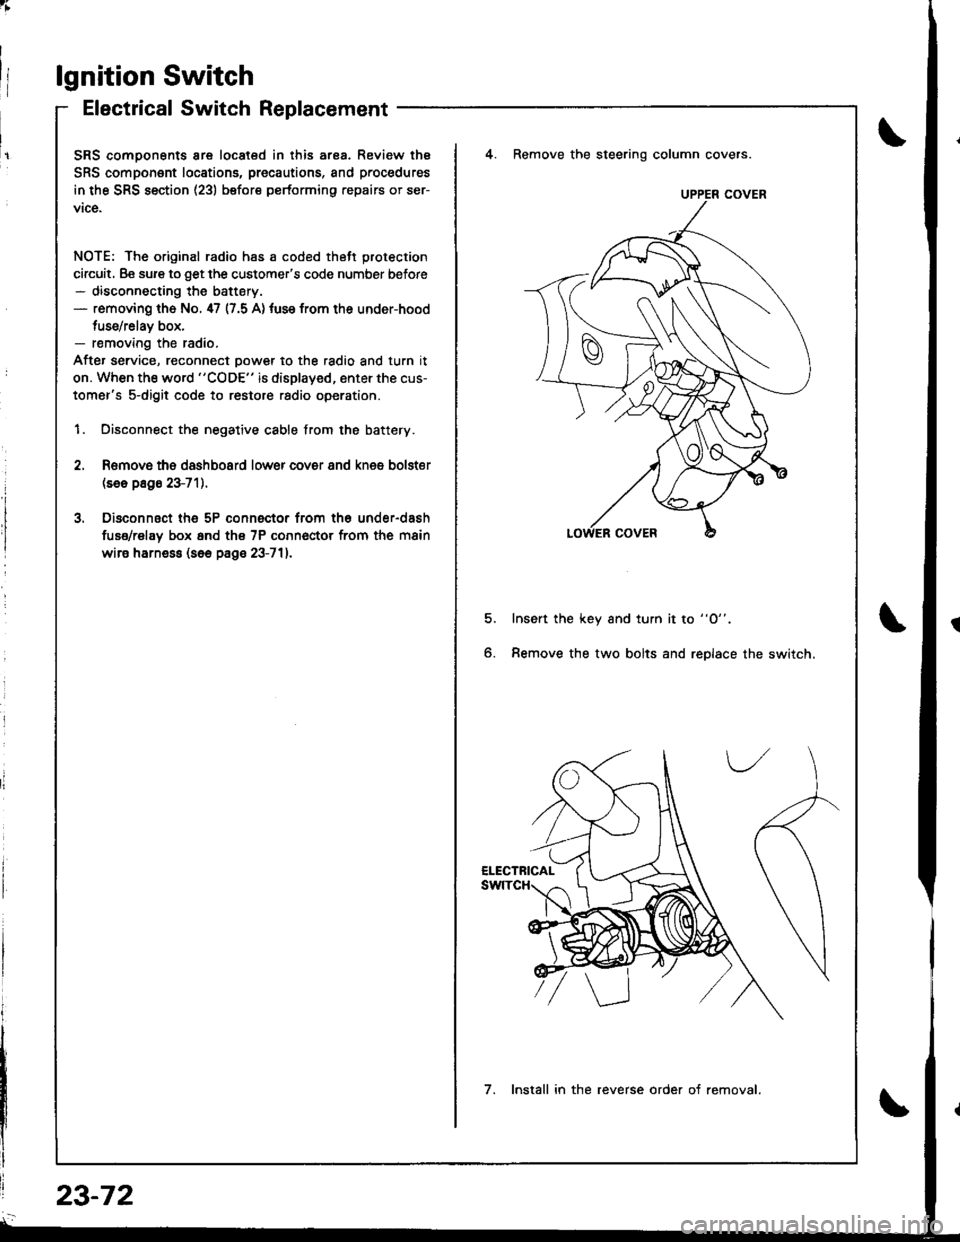 HONDA INTEGRA 1998 4.G Workshop Manual lgnition Switch
Electrical Switch Replacement
SRS comoonents are located in this ar8a. Review thE
SRS component locations, precautions, and procedures
in the SRS section (23) before performing repairs